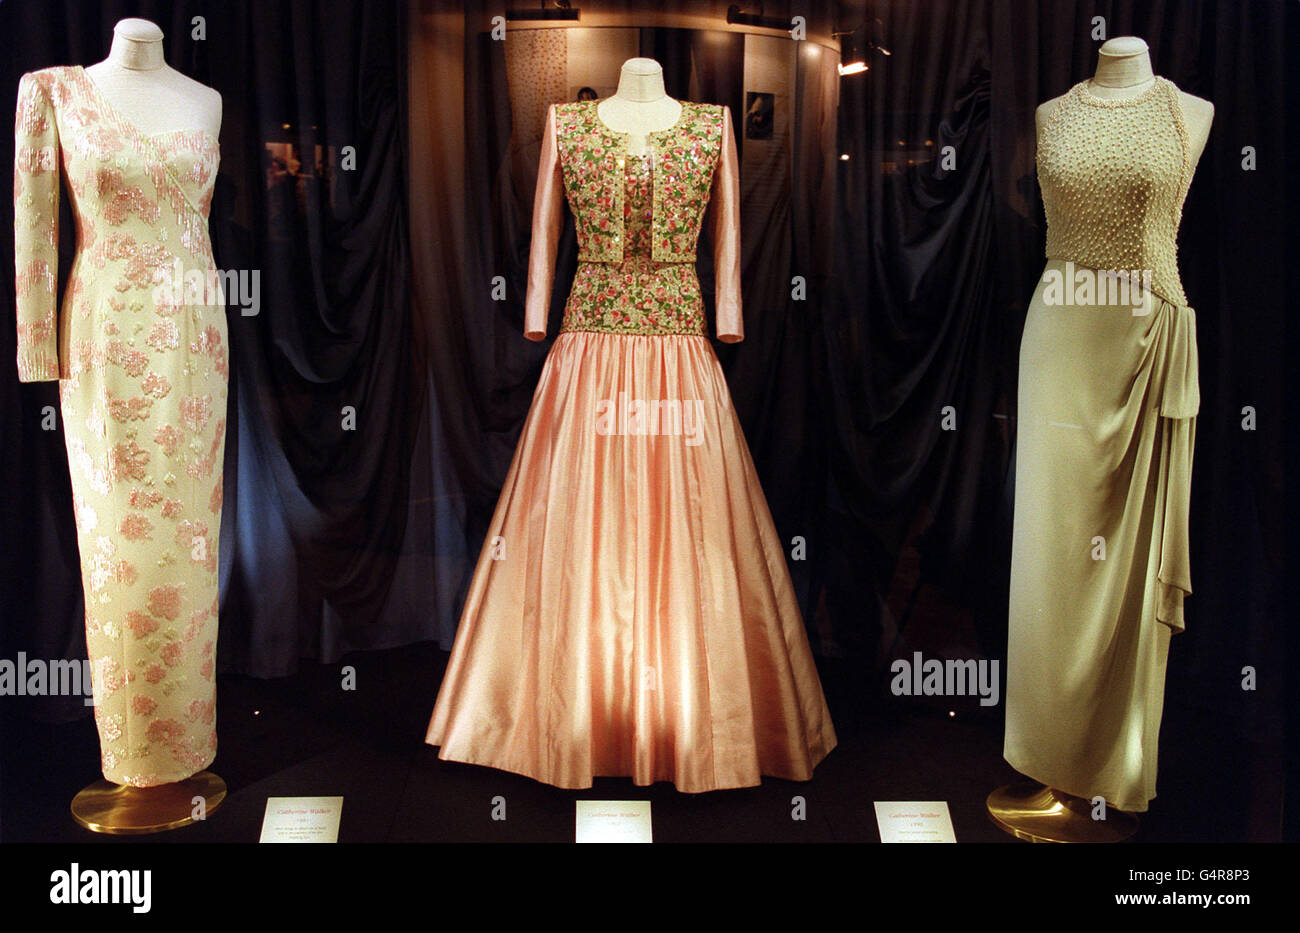 Diana's Dresses: Dresses created by designer Catherine Walker, worn by Diana, Princess of Wales. The dresses are on loan from the People's Princess Charitable Foundation, established by Maureen Rorech, who bought them at a Christie's auction in 1997. The dress in the centre (1992) was designed for the Princess' tour of India, while the dress on the right was worn to private functions. Stock Photo